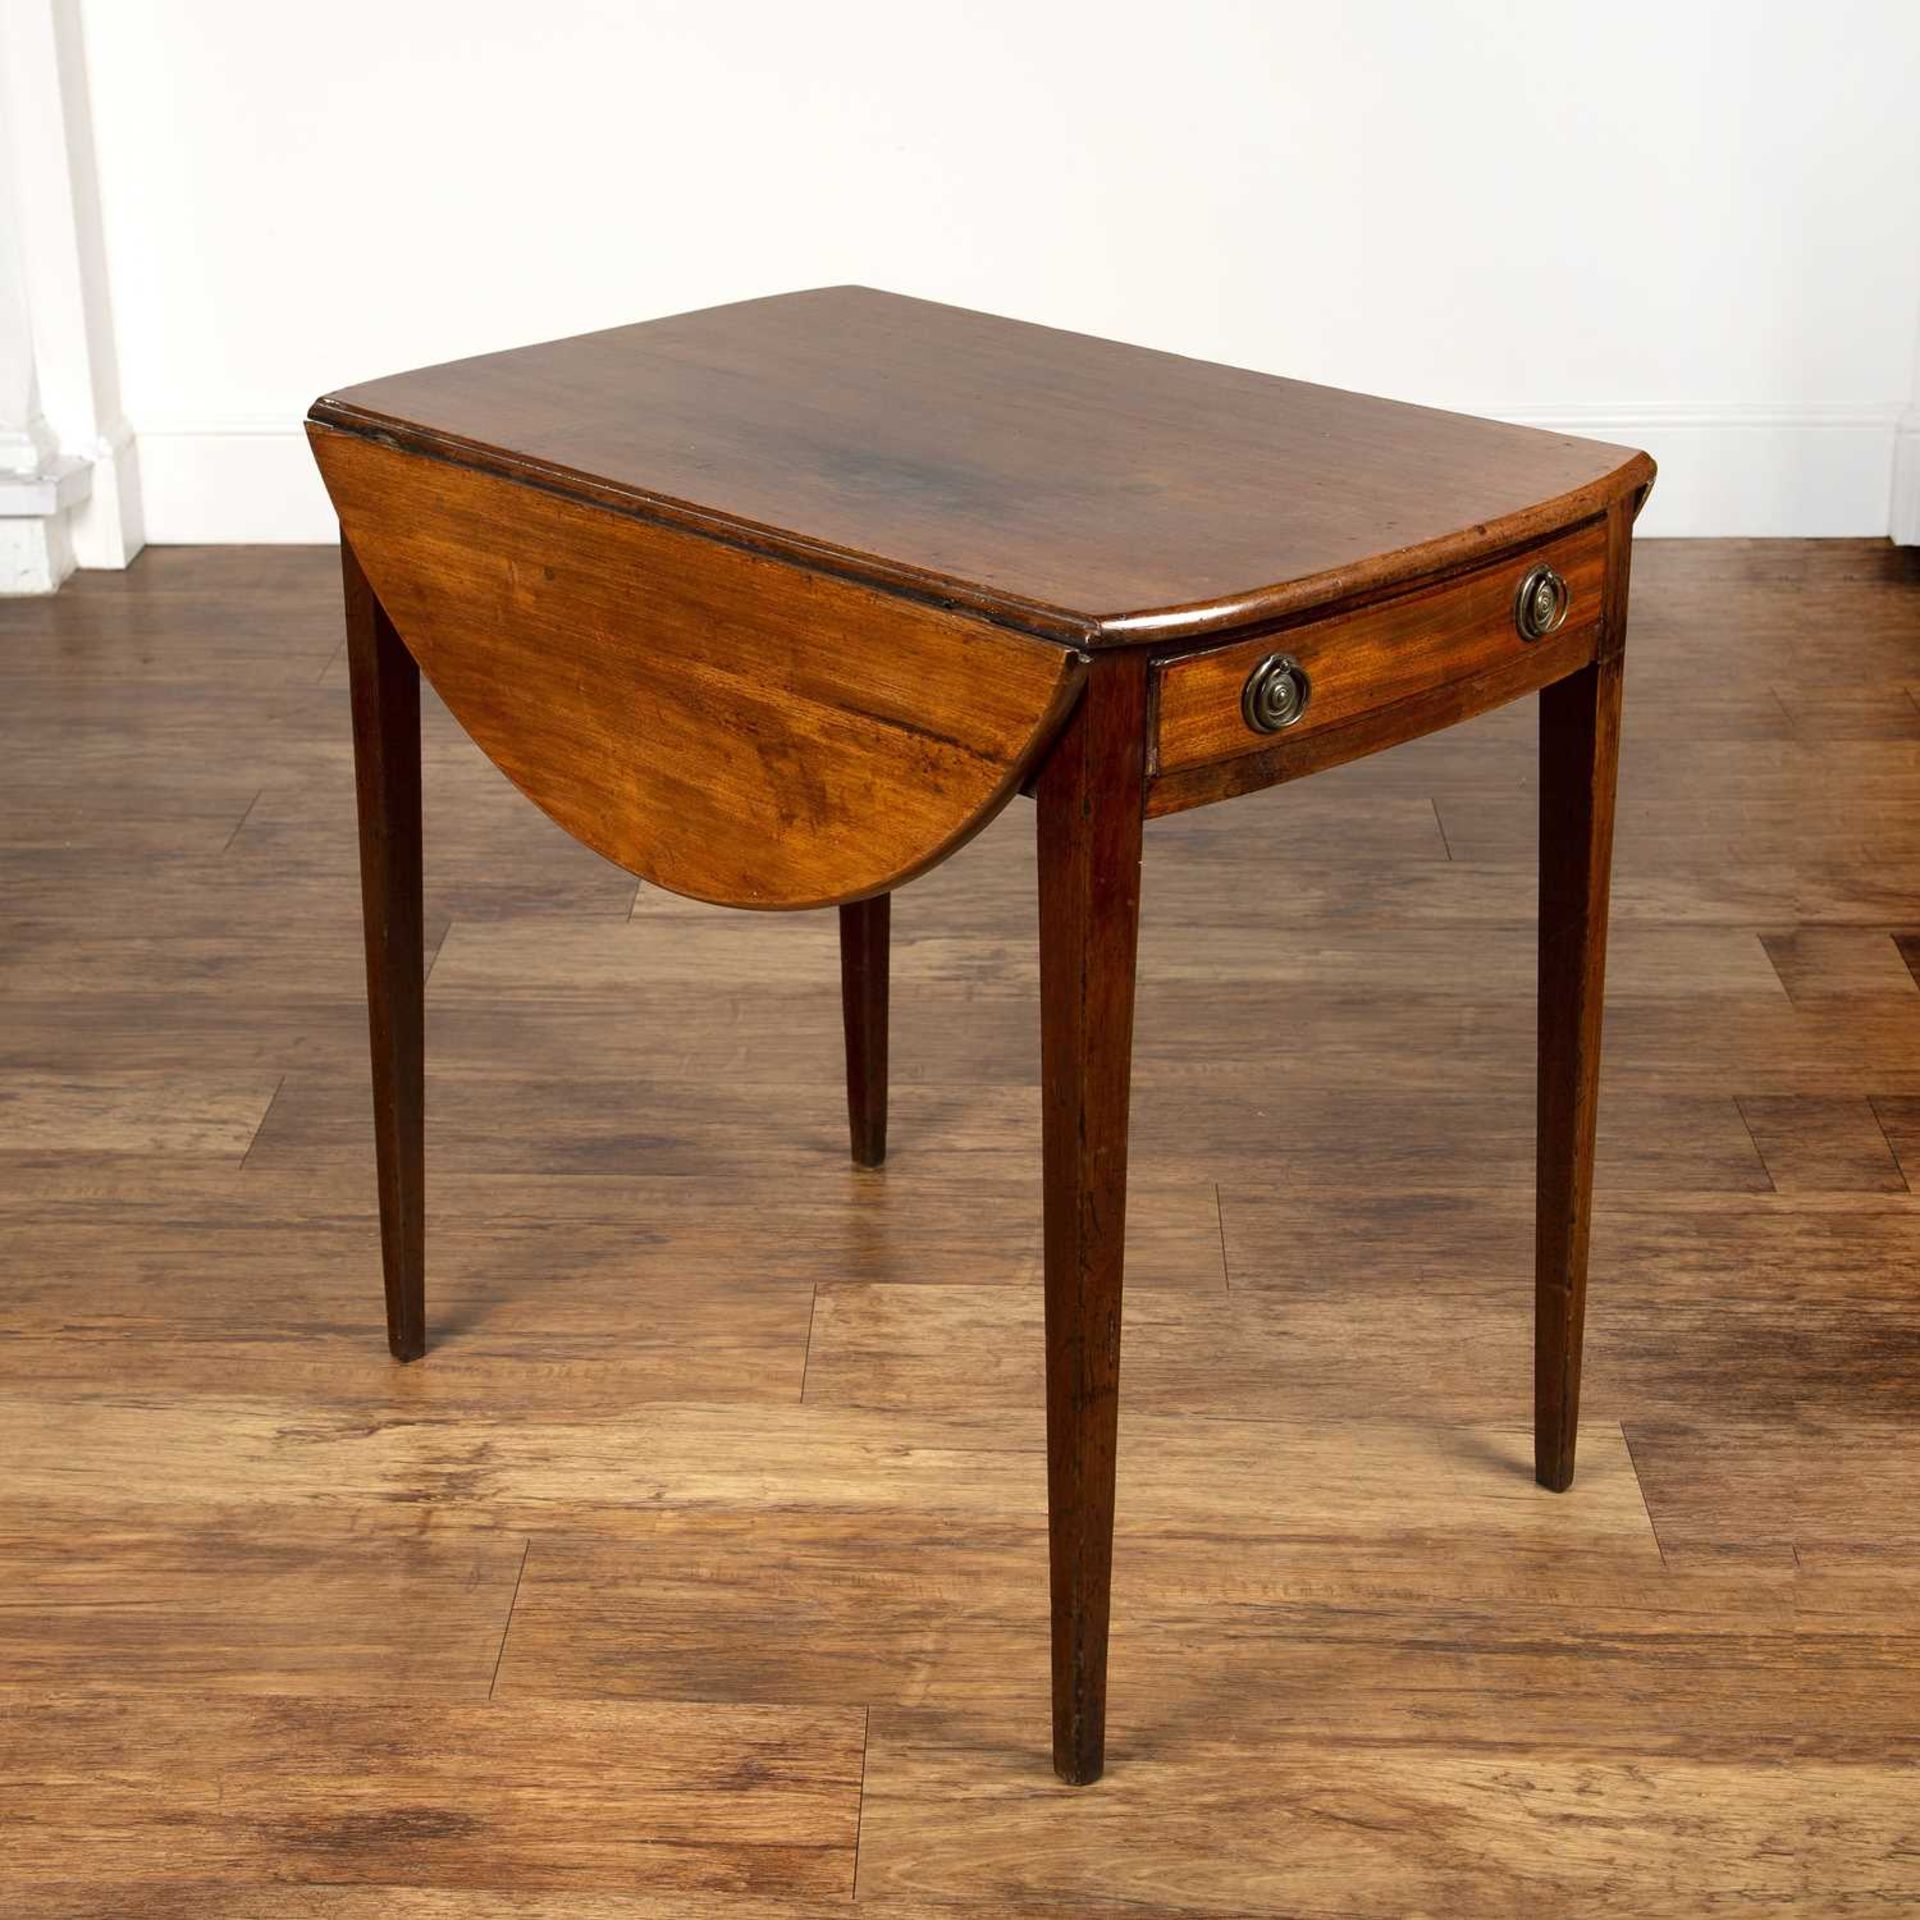 Mahogany Pembroke table 19th Century, fitted with a single frieze drawer and one faux drawer, on